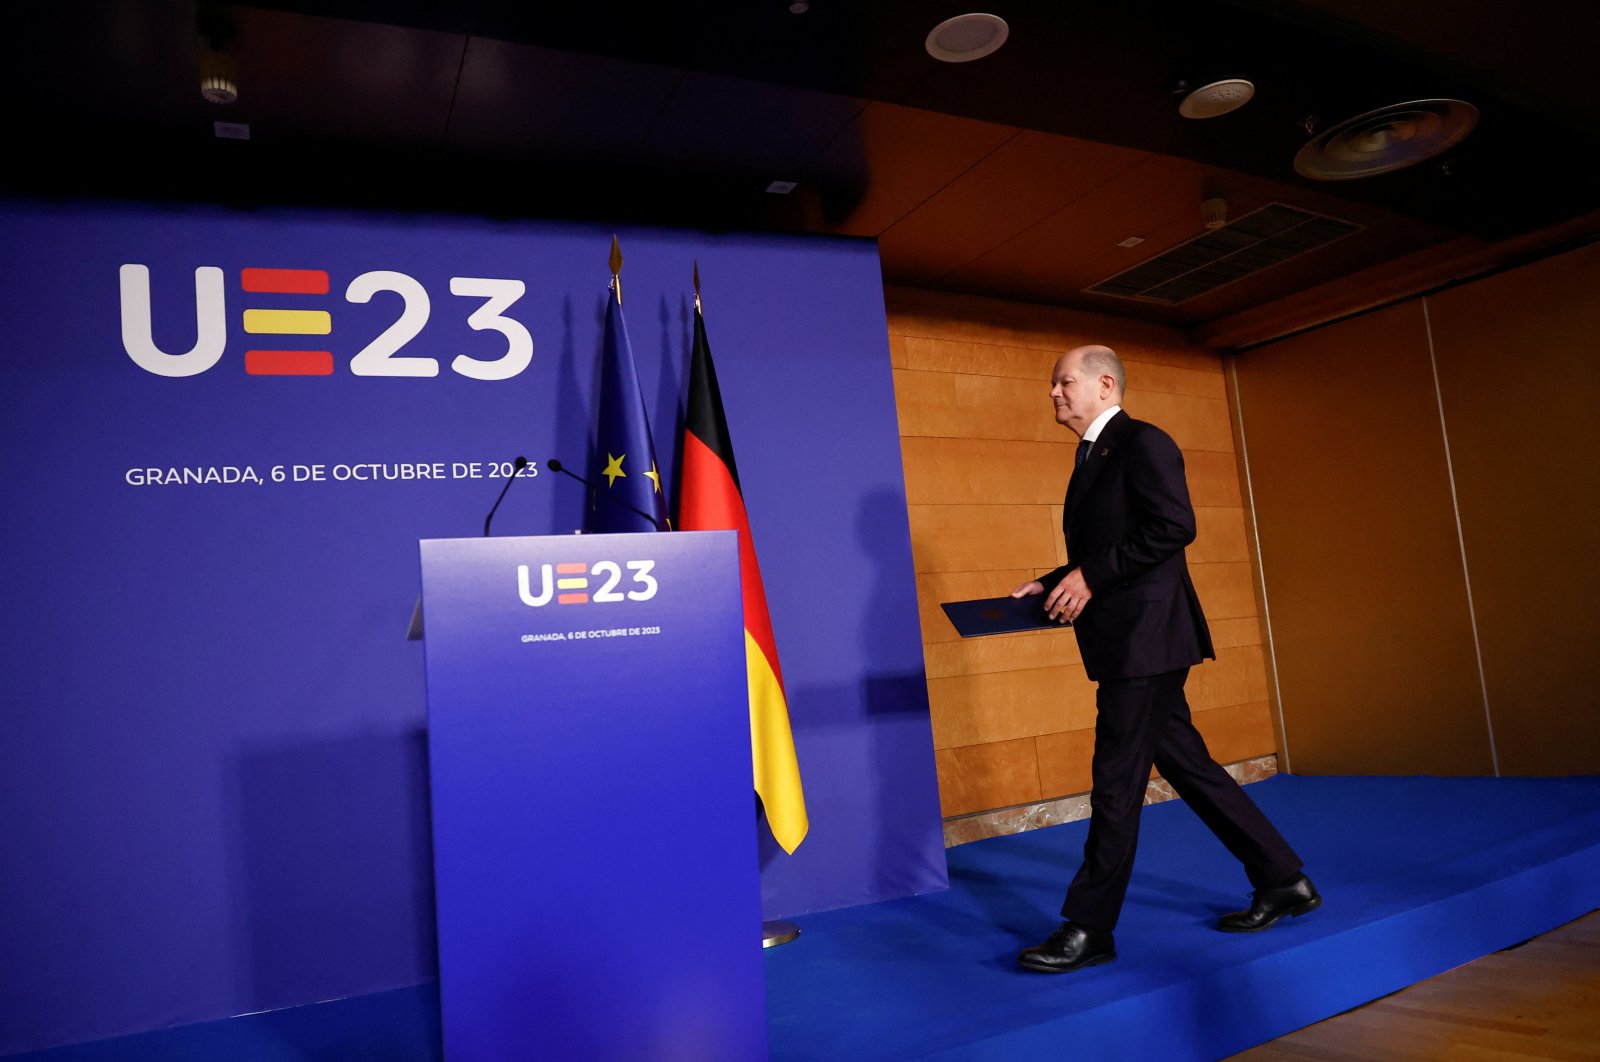 German Chancellor Olaf Scholz arrives to attend a news conference, as the informal meeting of European heads of state or government takes place in Granada, Spain Oct. 6, 2023. (Reuters Photo)